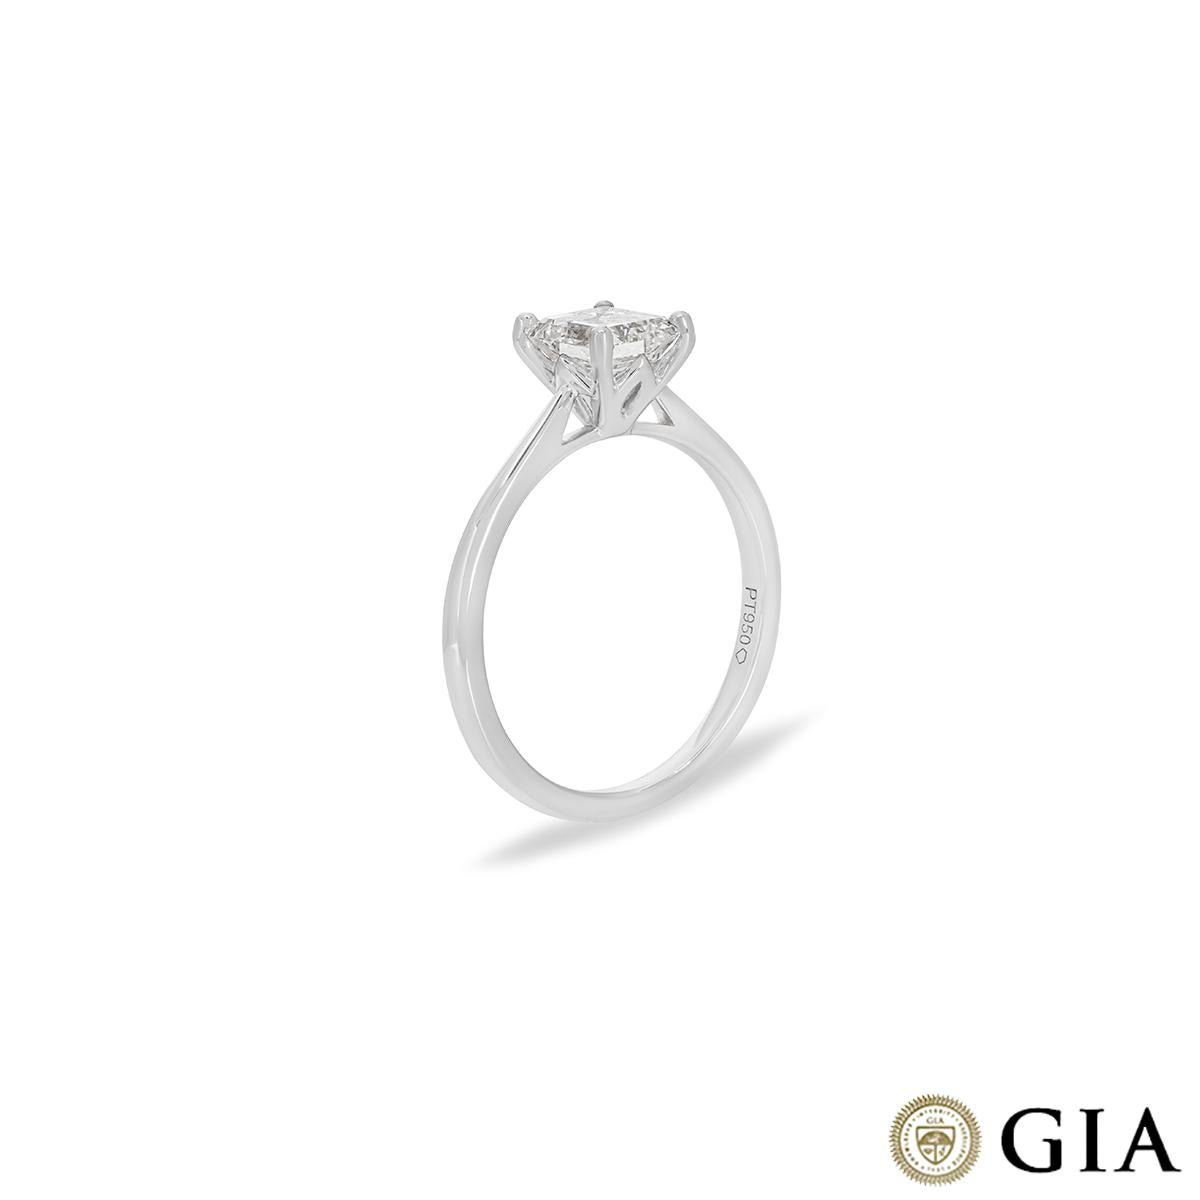 A classic platinum diamond engagement ring. The solitaire is set in a classic four prong mount with an emerald cut diamond weighing 1.03ct, E colour and VVS2 clarity. The ring tapers from 1mm to 2mm, has a gross weight of 3.54 grams and is currently